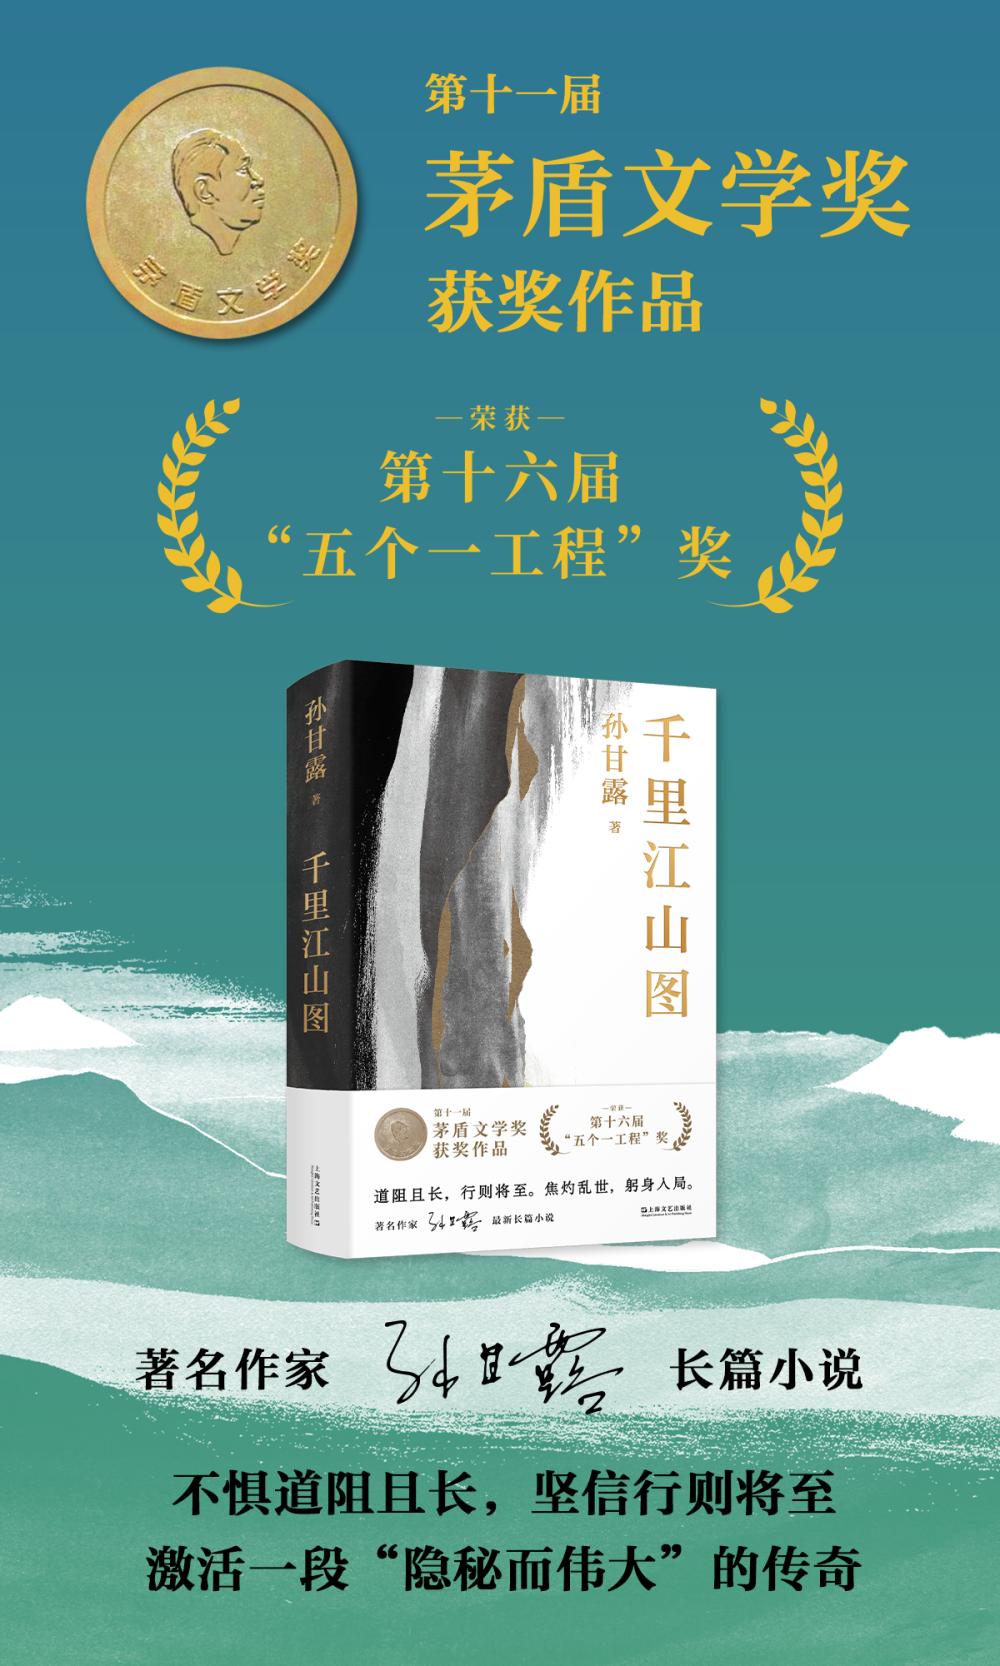 It's just a reward, Sun Ganlu: Shanghai Writers and Literature Publishing House | New Works | Writer, who has the privilege of living and working here and is the third to win the Mao Dun Literature Award